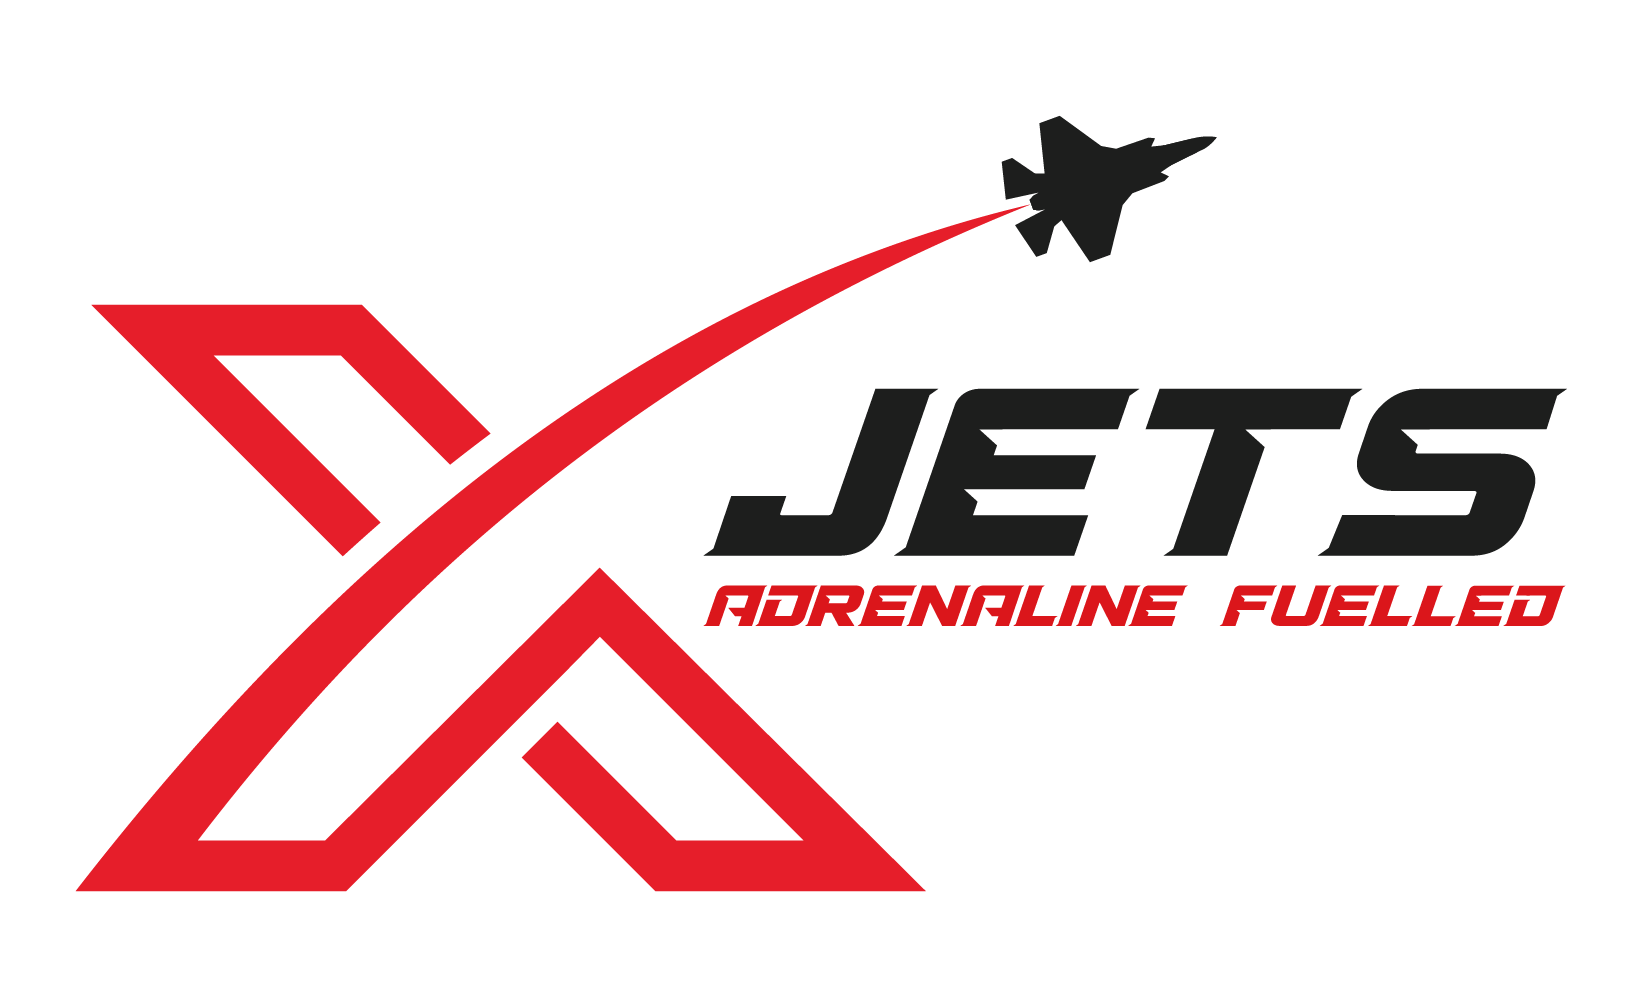 Contact us XJETS